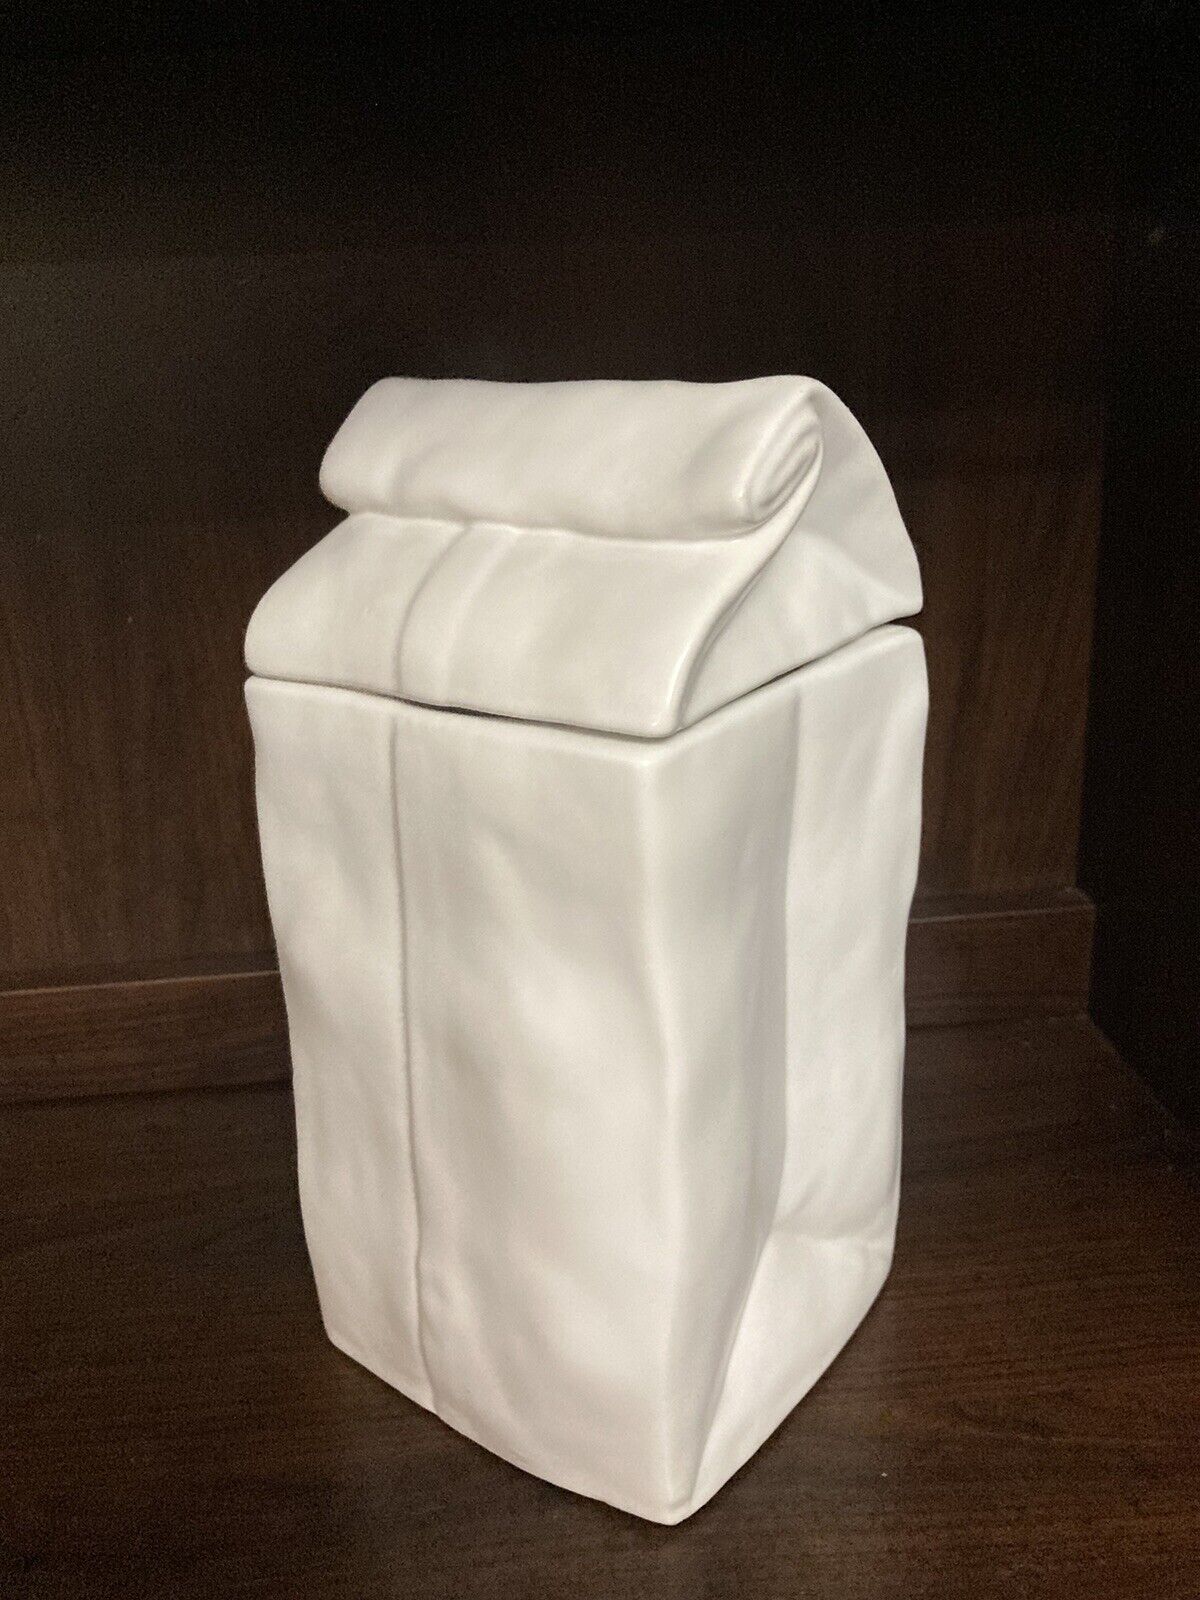 Chantal Canister Bag 64oz. Ceramic White Lunch Sack Biscuit Jar Rubber Seal